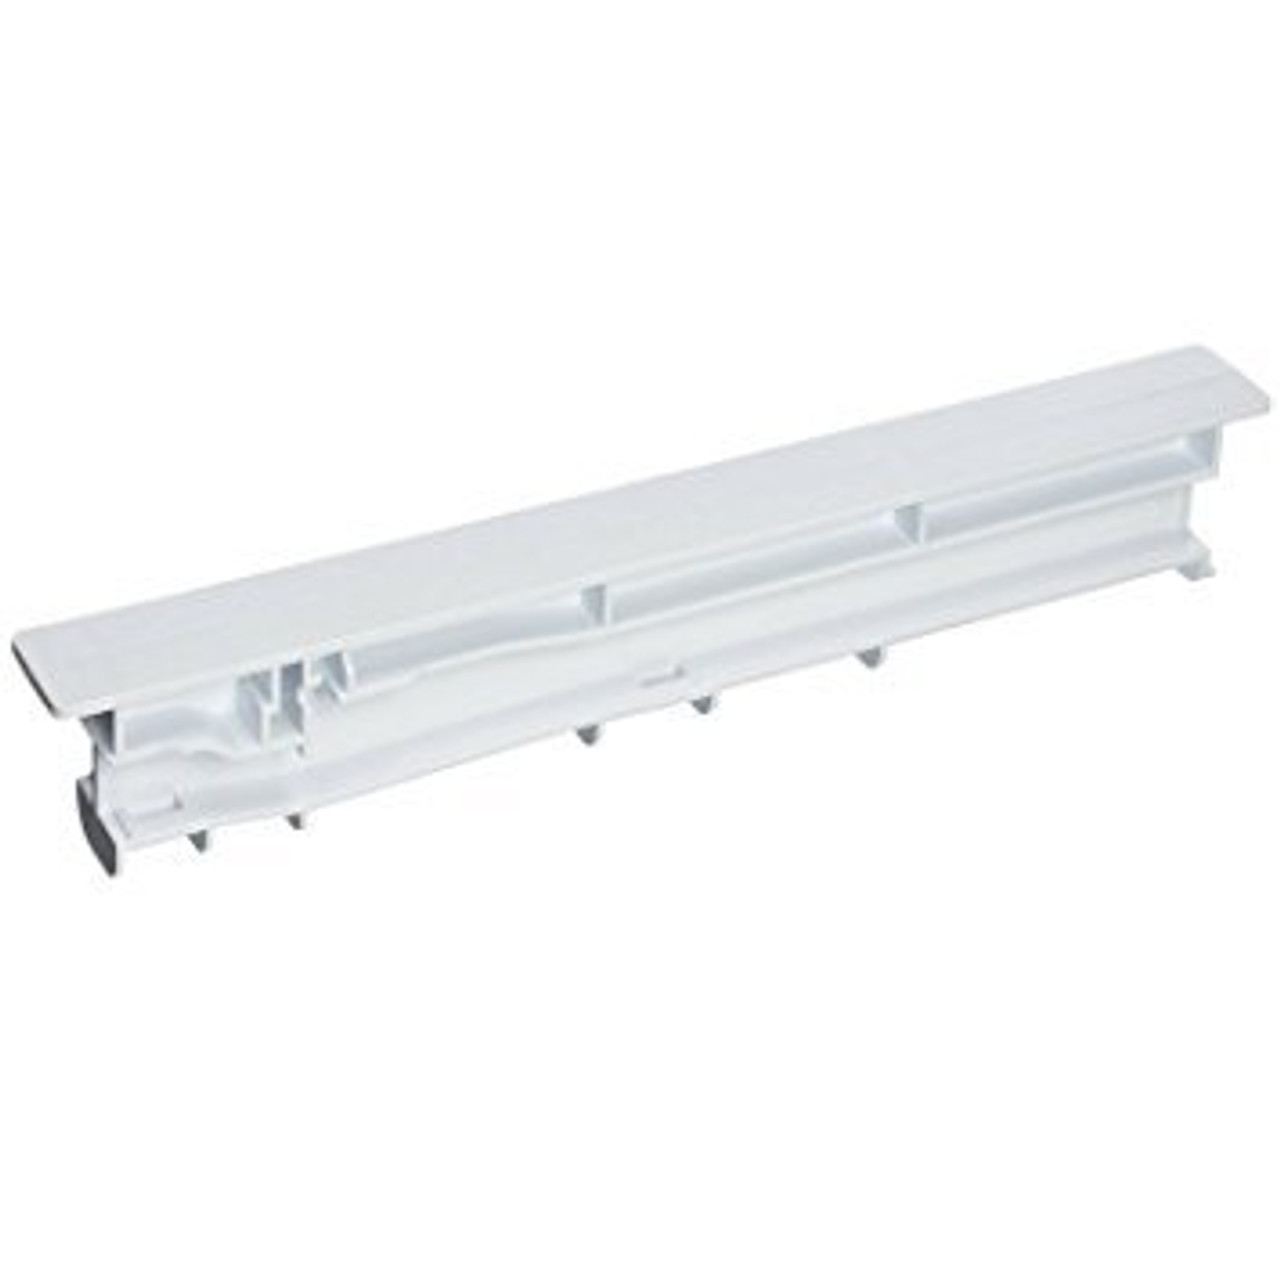 2188656 Crisper Pan Compatible with Whirlpool Refrigerator